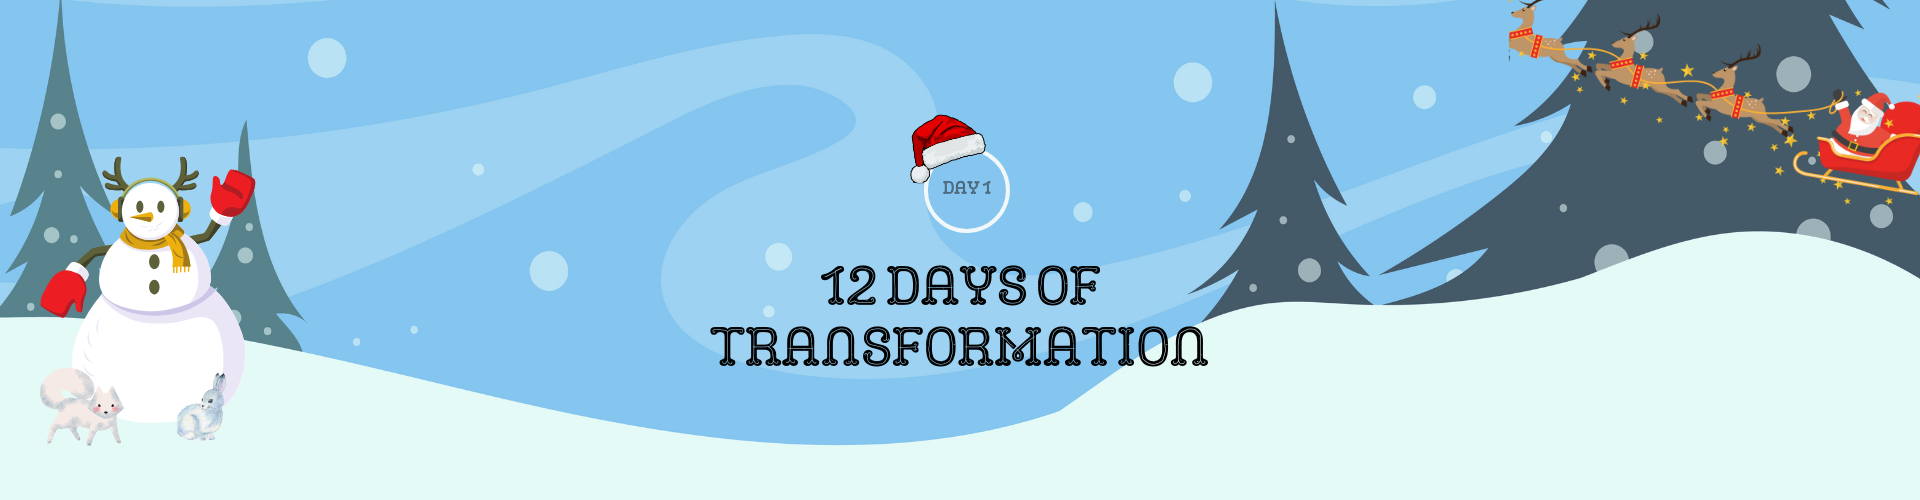 12 Days of Transformation Blog Banner | Festive winter holidays-themed banner with a cheerful snowman and Santa Claus riding his sleigh